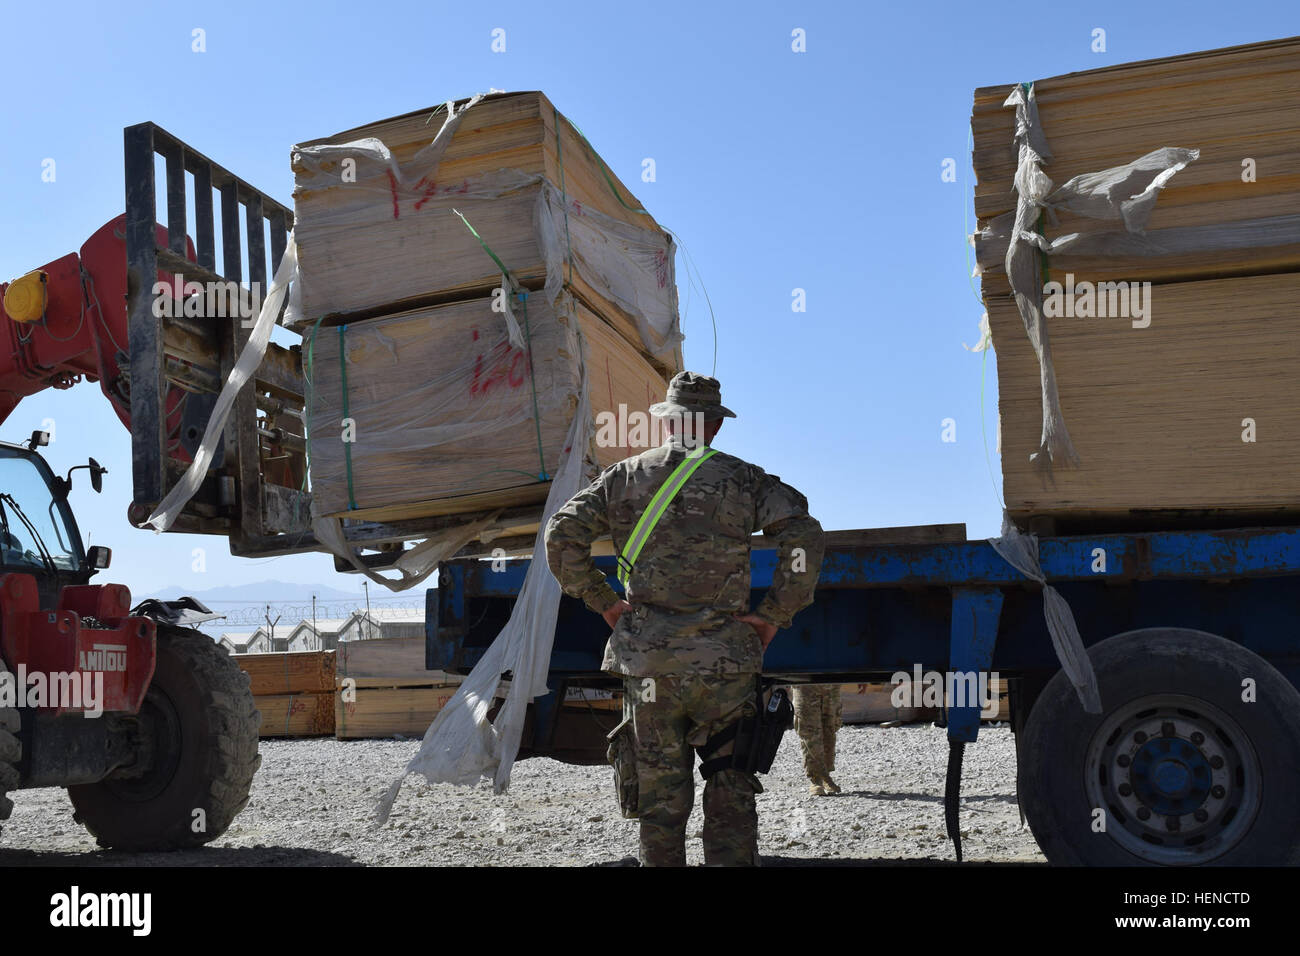 Petty Officer 1st Class (LS1) Franklin Stollings, noncommissioned officer for the Defense Logistics Agency-Distribution Services, ensures the alignment of wood being loaded onto a flatbed that was sold to an Afghan company for a white goods contract on Bagram Air Field, Afghanistan, July 27, 2014. White goods are excess Department of Defense property that is sold to local businesses. (DoD photo by U.S. Army Maj. Devon McRainey/Released) Defense Logistics Agency white goods sale 140727-A-XY287-003 Stock Photo